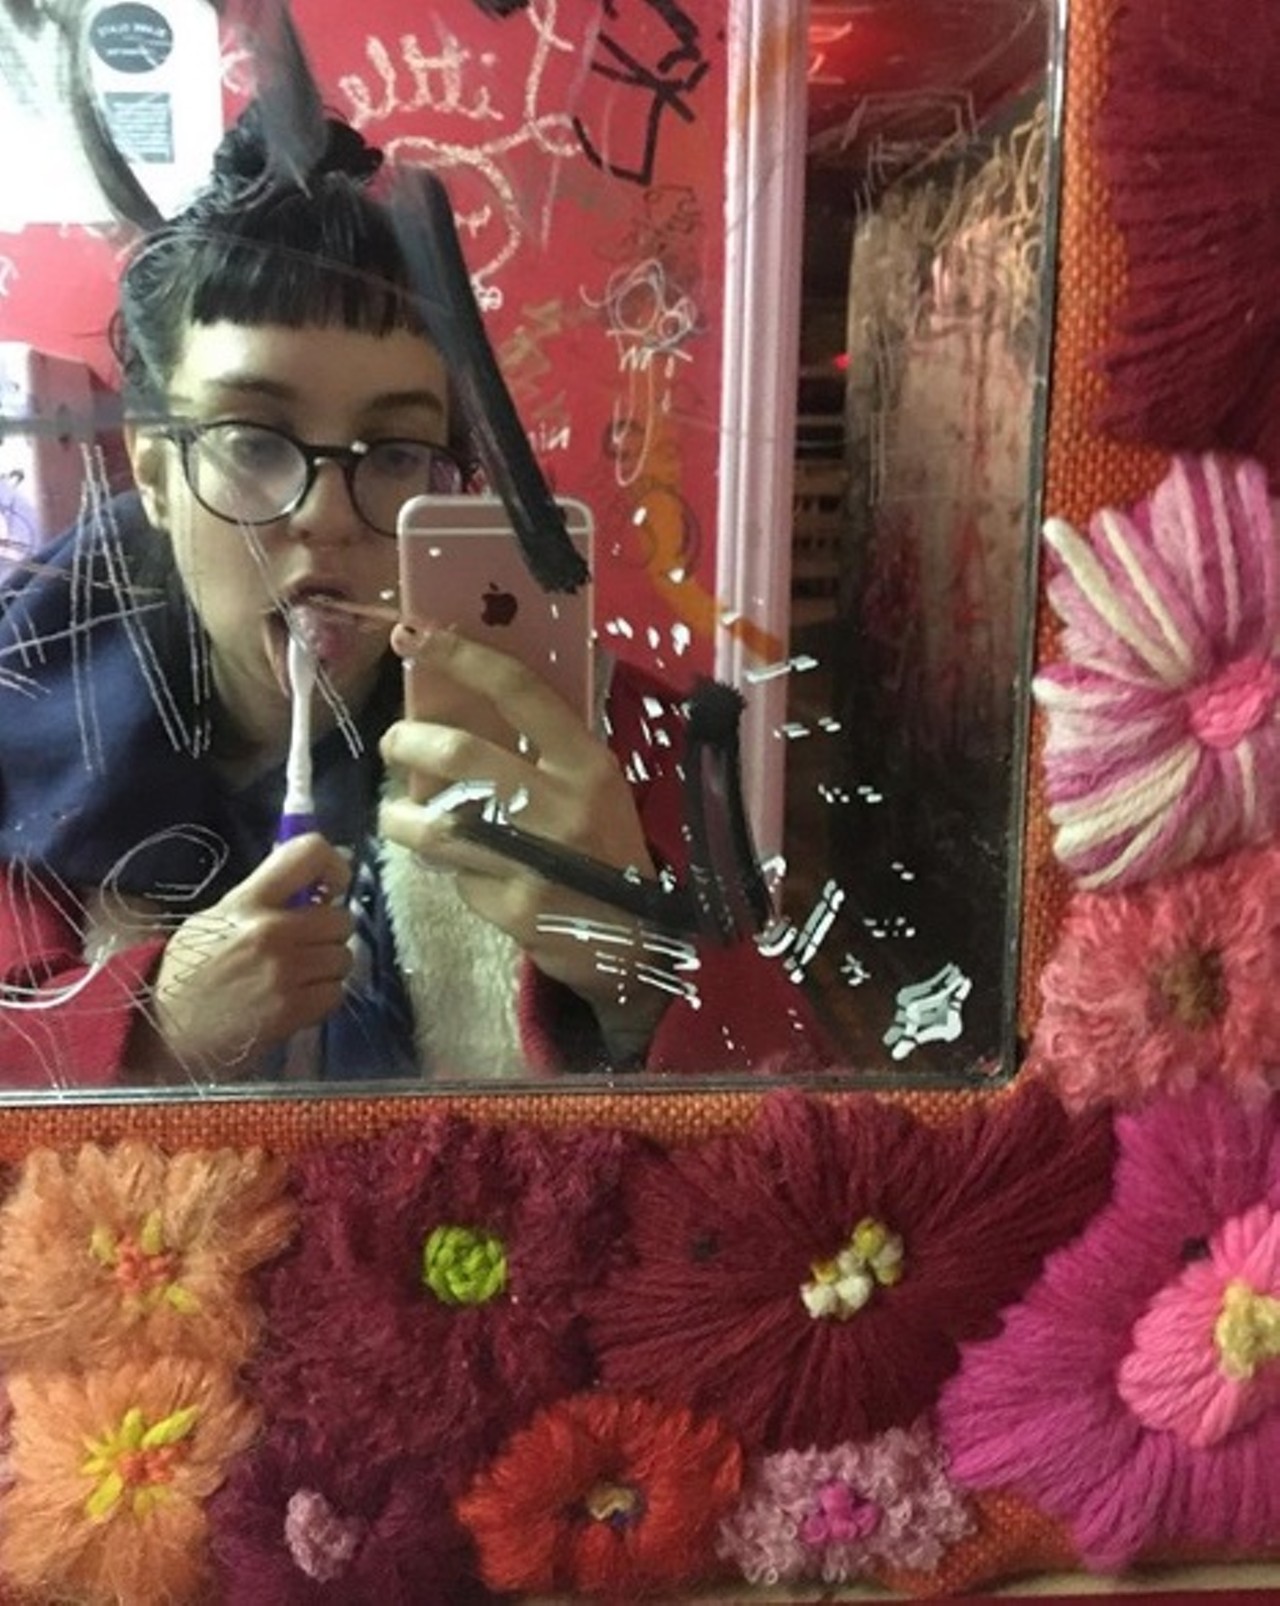 Now That&#146;s Class
11213 Detroit Rd., 216-221-8576  
A pink bathroom filled with scribbles and flowers. Before snapping through the writing on the mirror, add some of your own for your next selfie. 
Photo via hashbrownmami666/Instagram